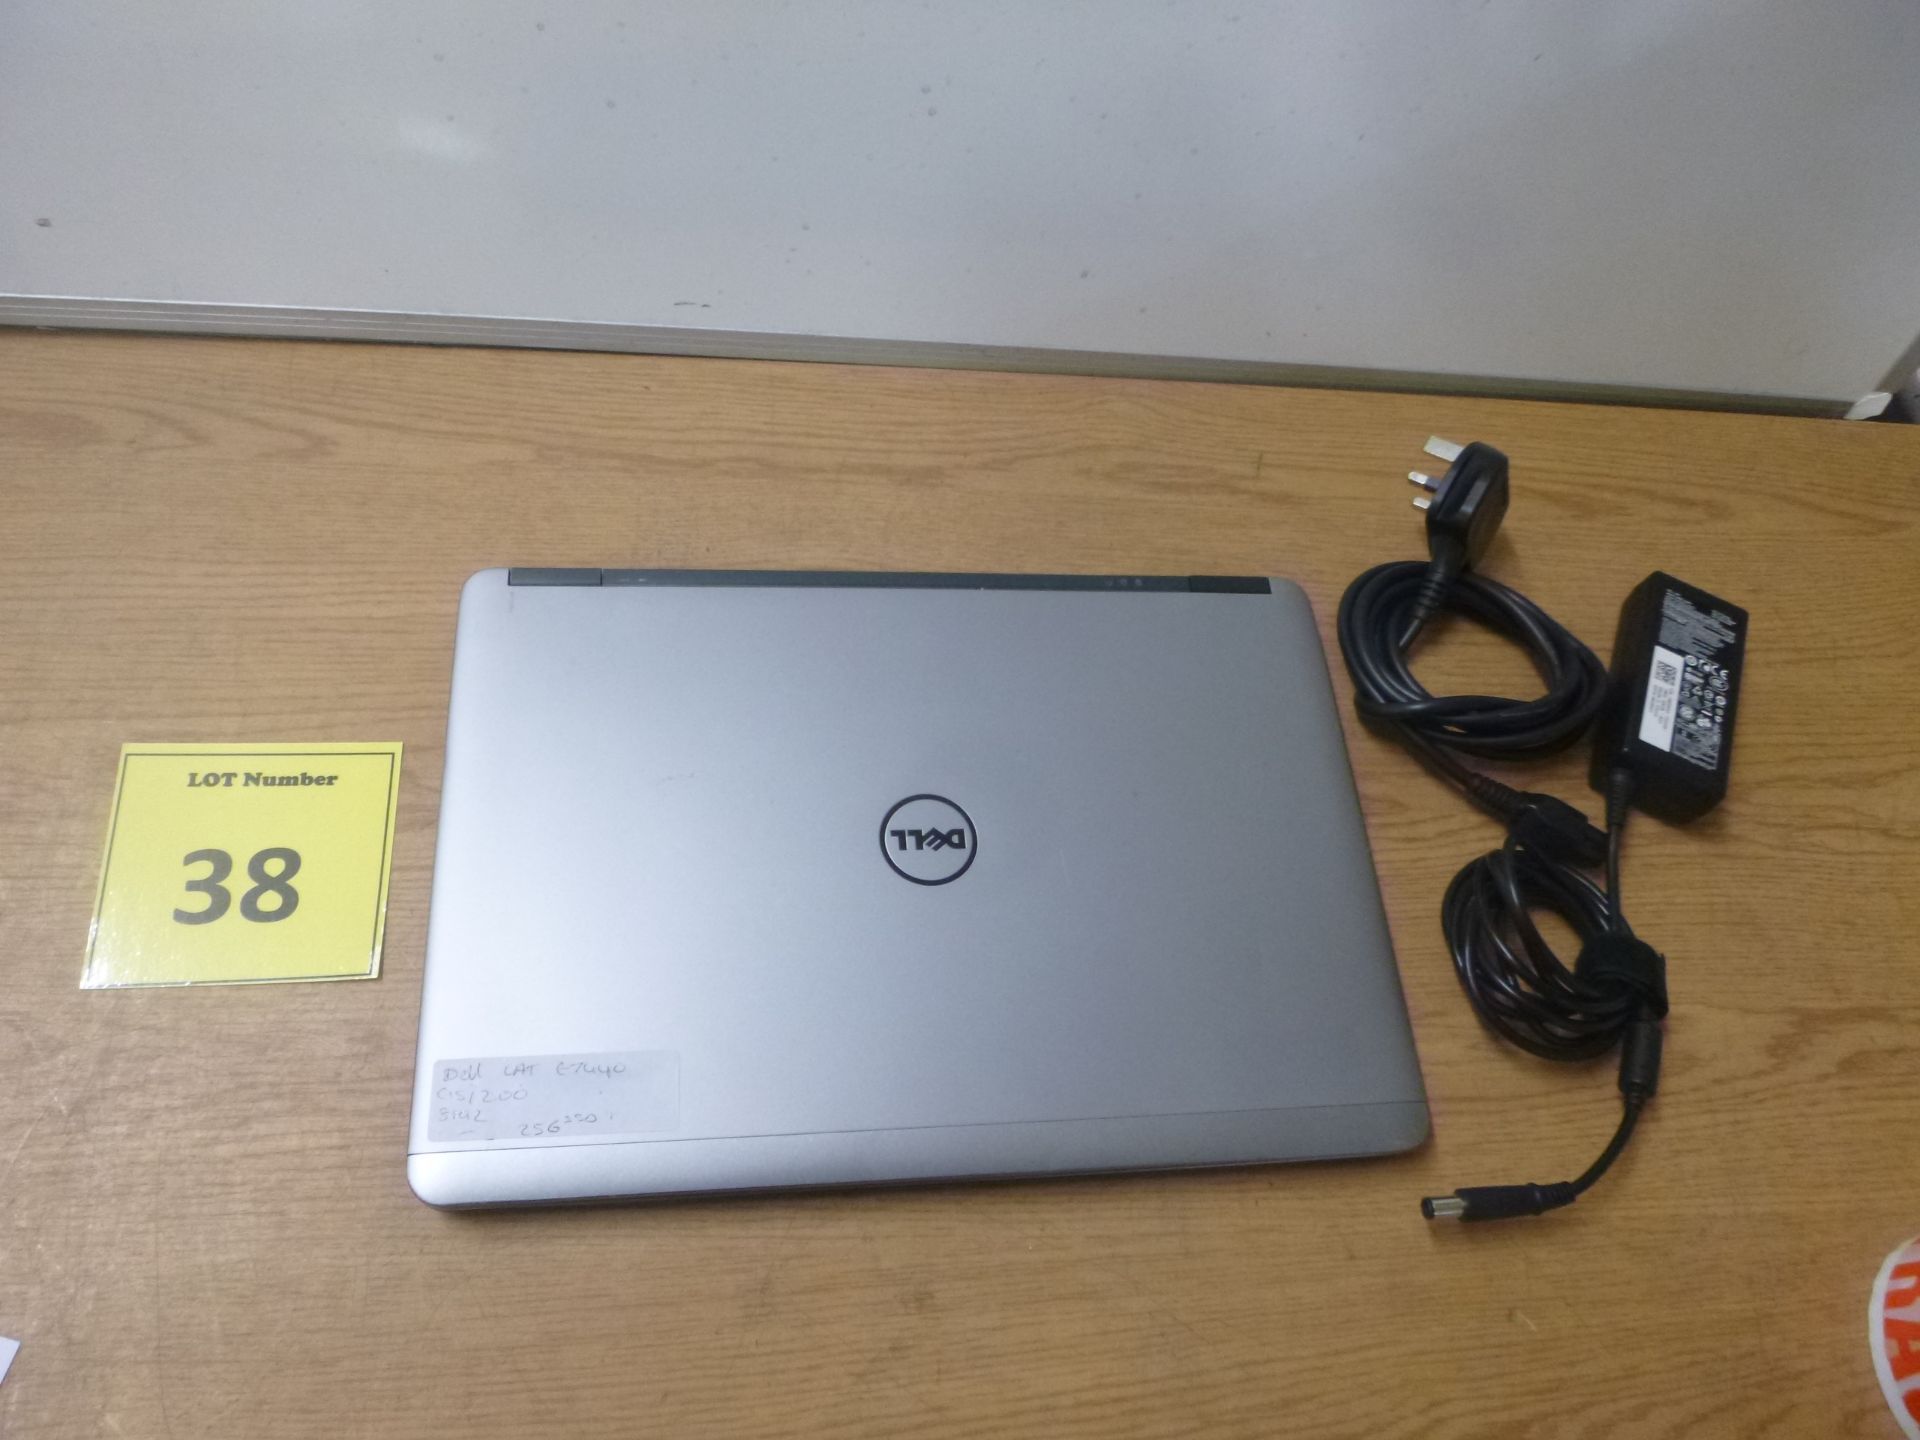 DELL LATITUDE E7440 LAPTOP. CORE i5 2.0 GHZ PROCESSOR, 8GB RAM, 256 GB SOLID STATE HDD. WITH PSU & - Image 2 of 2